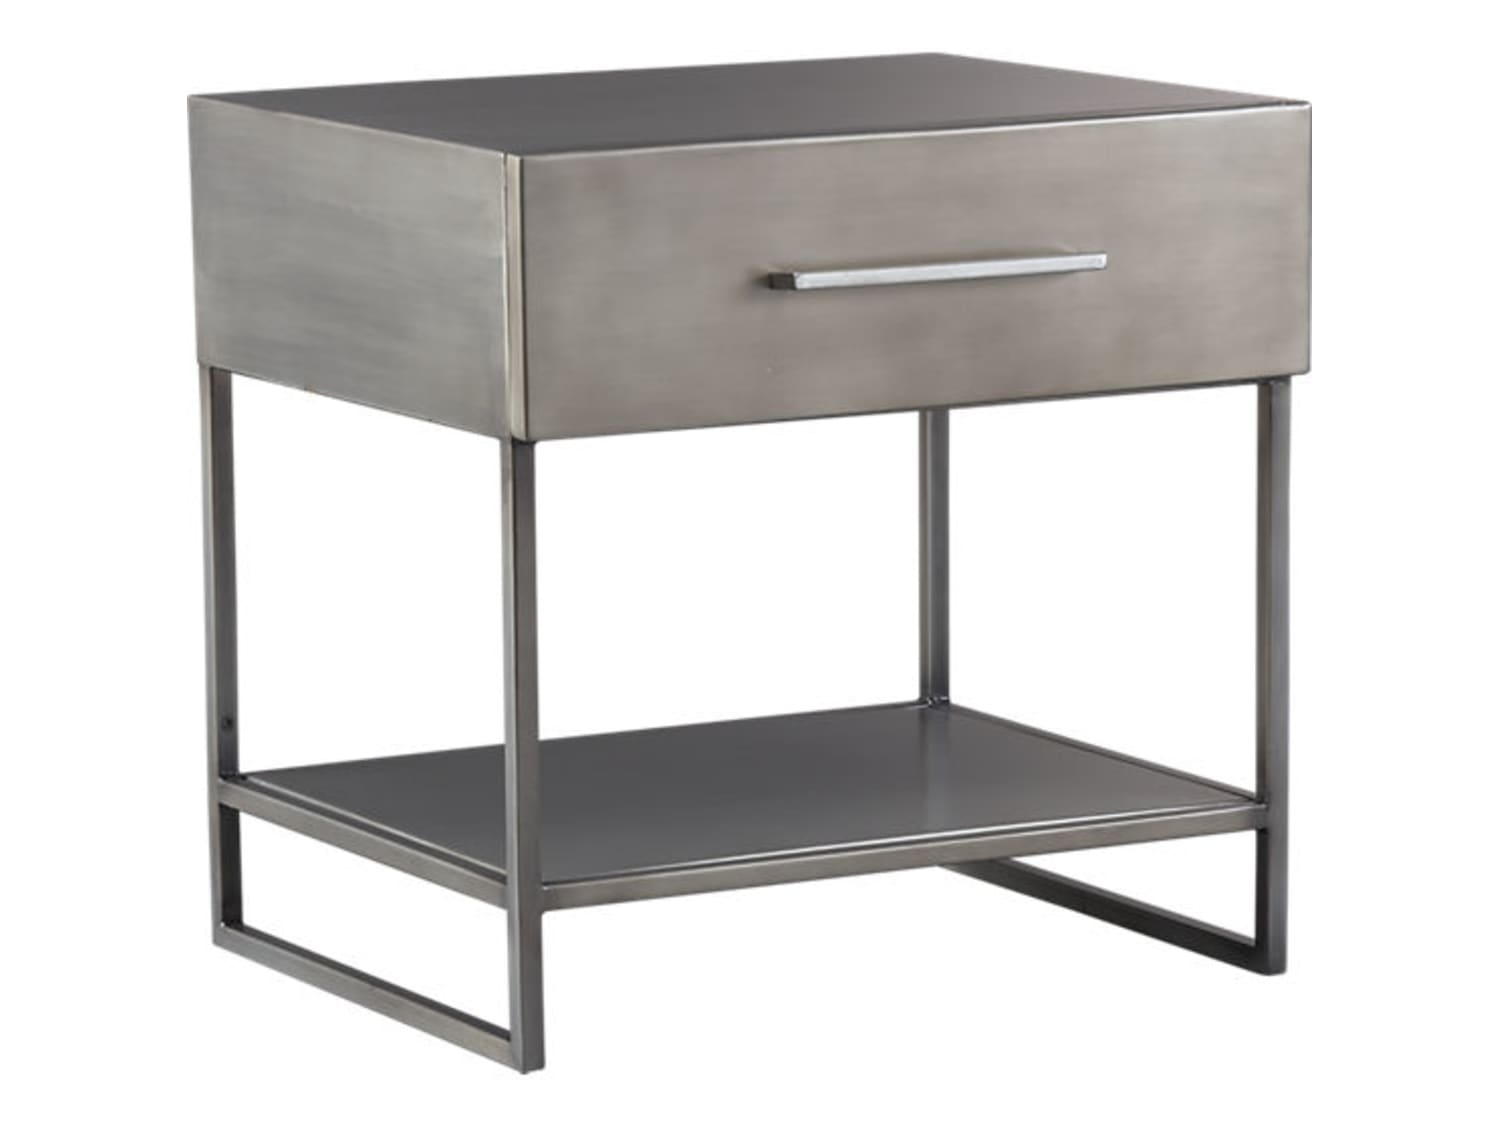 2 Nightstands / End Tables ~ MODERN ~ CB2 ~ - Apartment Therapy's Bazaar.